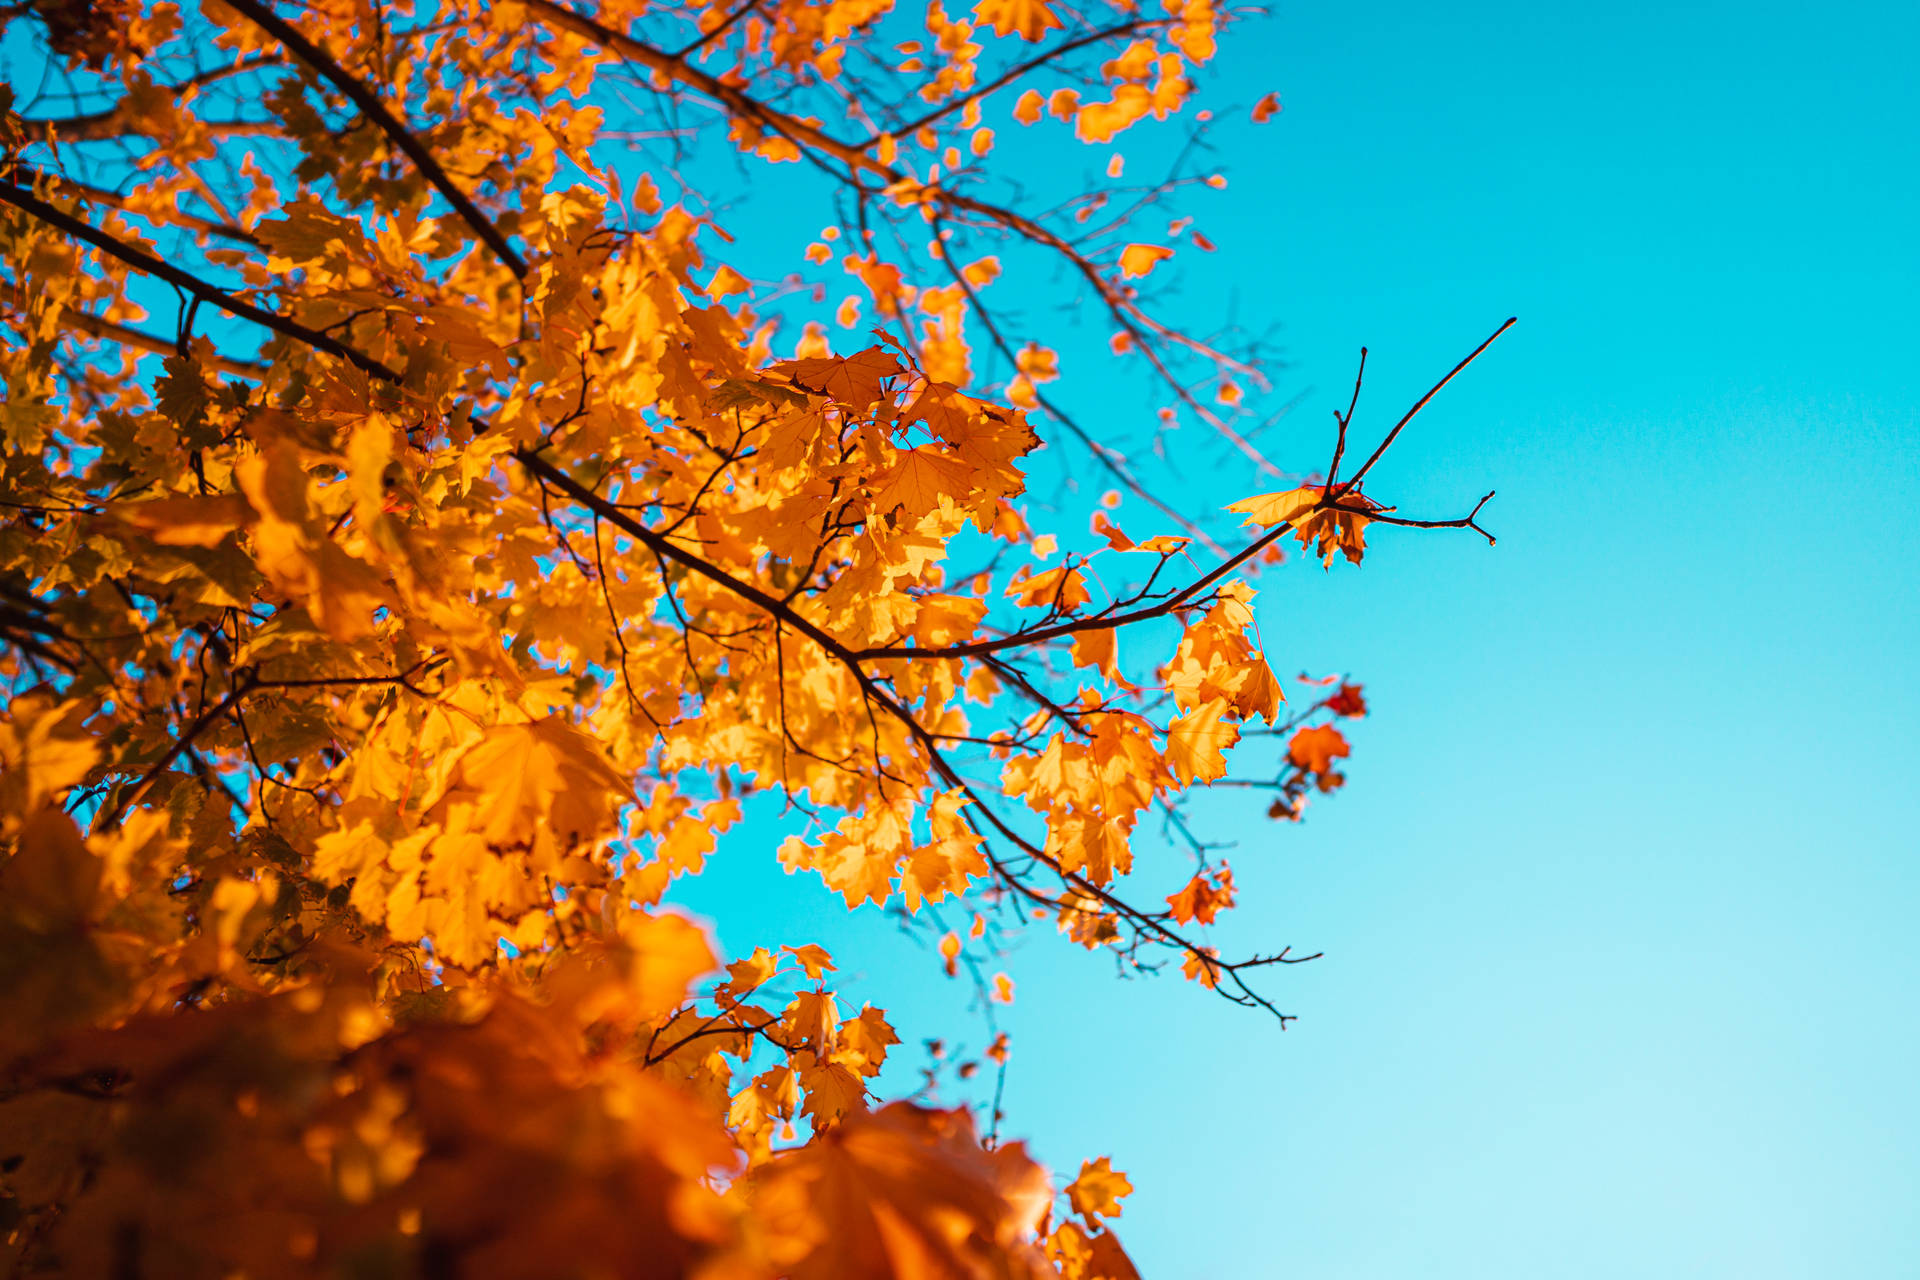 Aesthetic Sky And Autumn Leaves Background